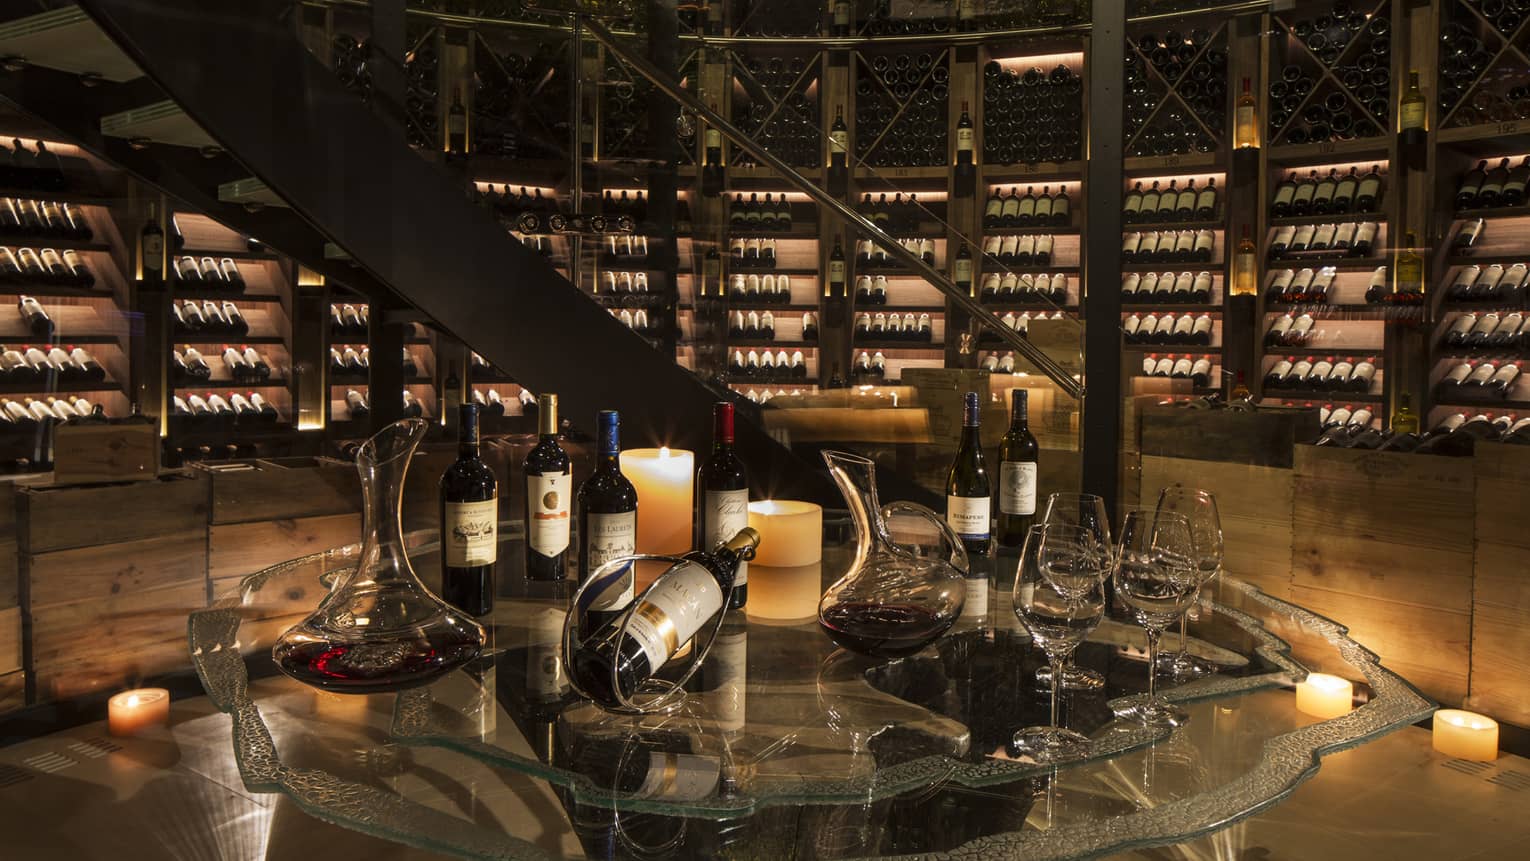 Bottles of wine are arranged for a tasting within an expansive, candlelit wine cellar